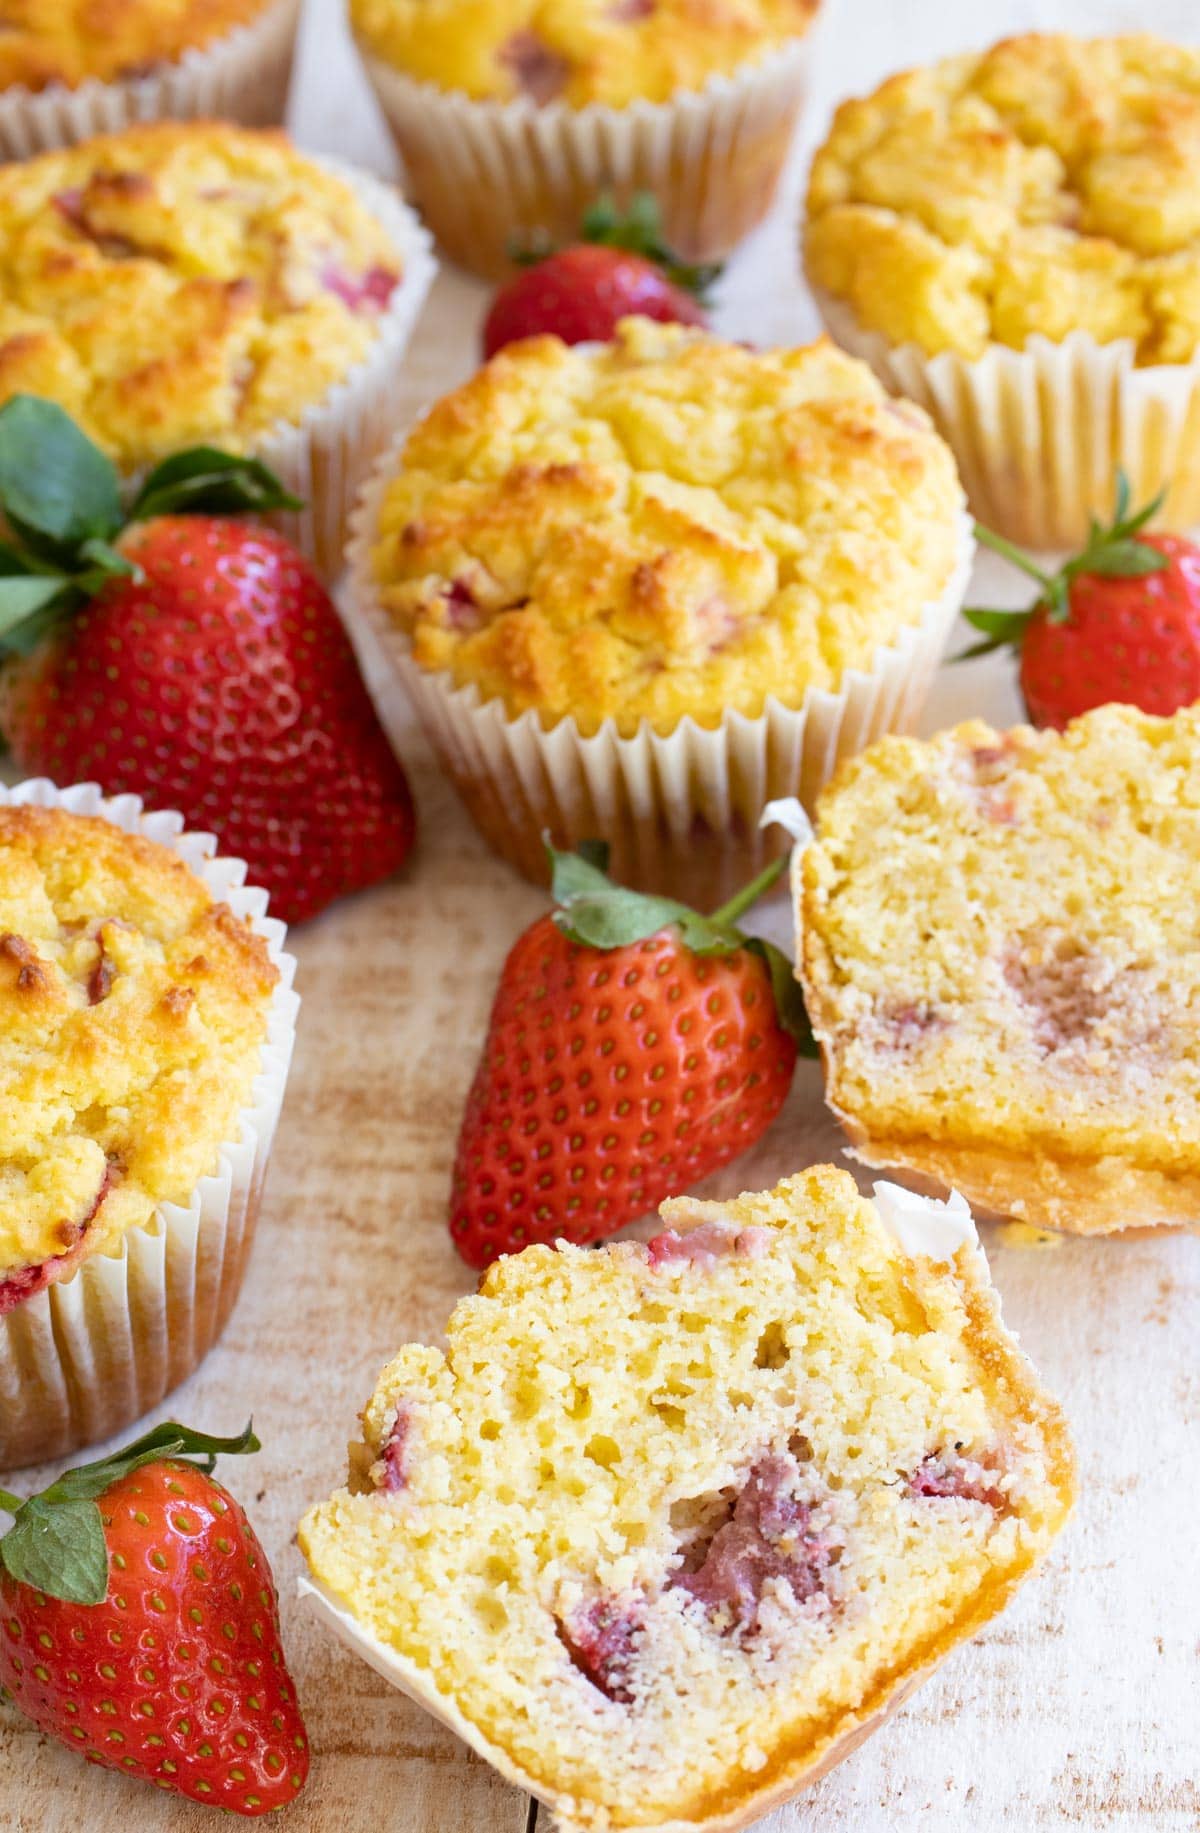 a halved strawberry muffin o a table showing the inside, surrounded by strawberries and more muffins in the background